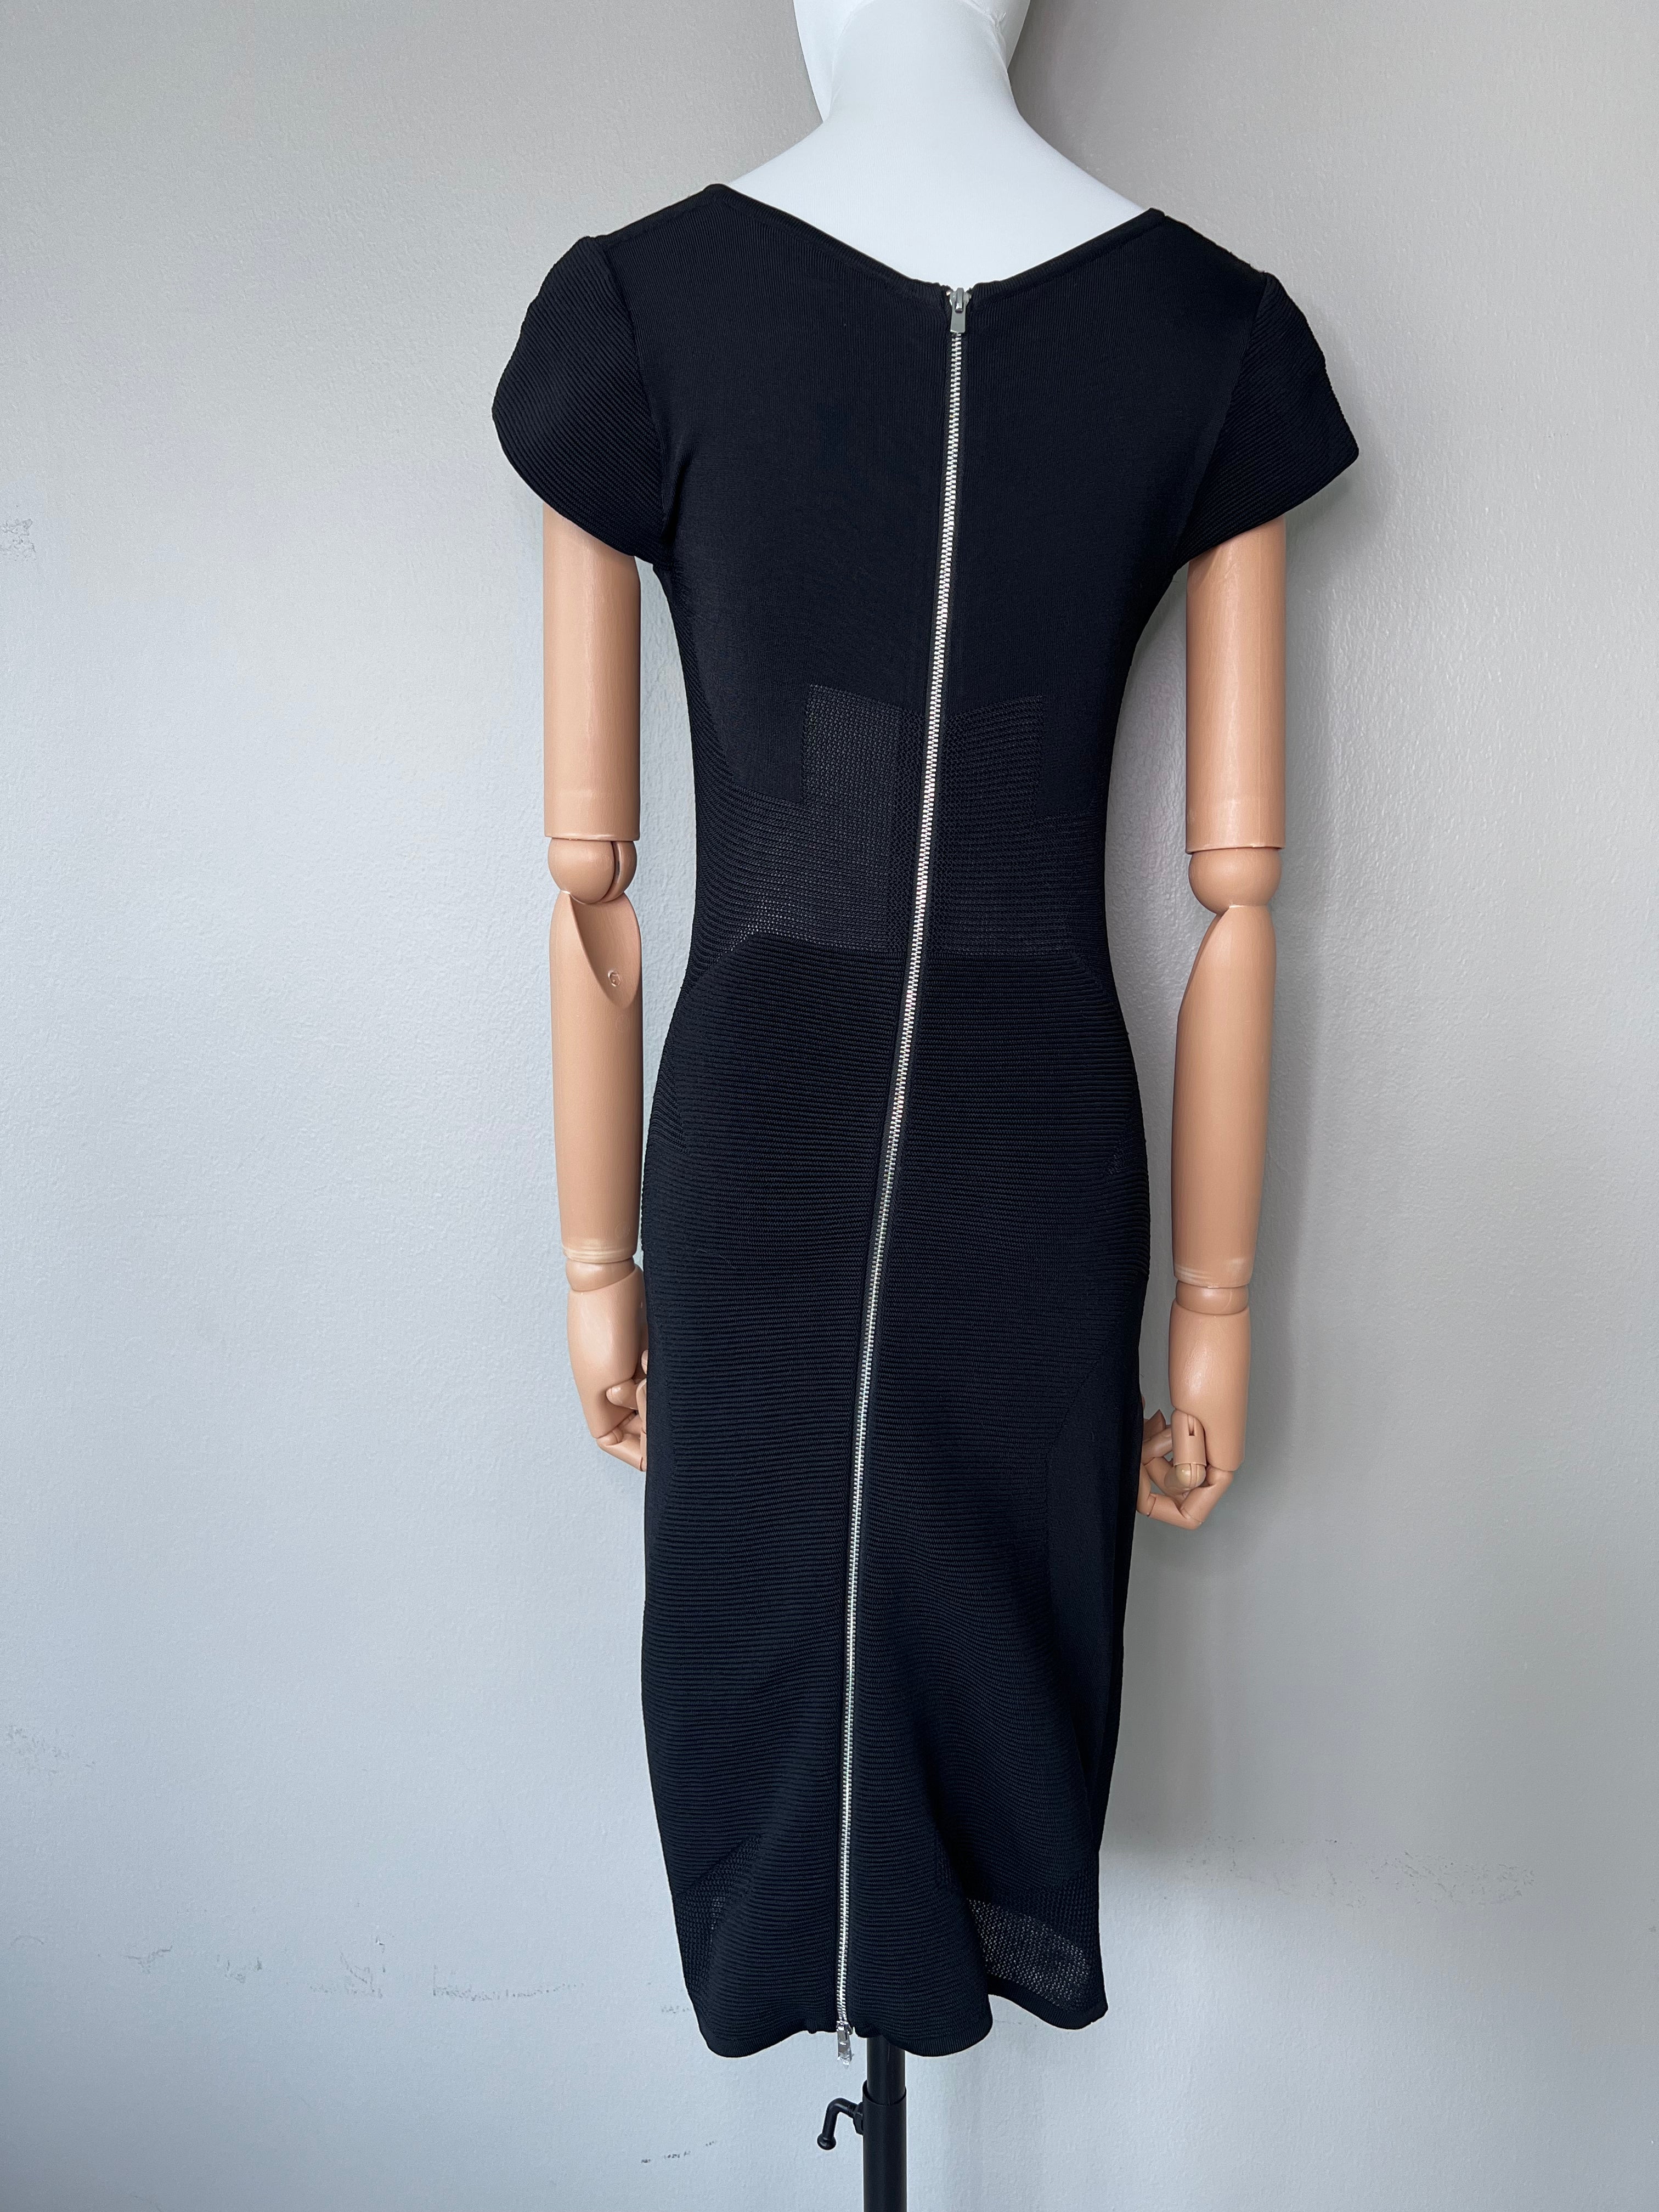 Tight black knitted dress with crew neck collar, see-through material. - MAJE